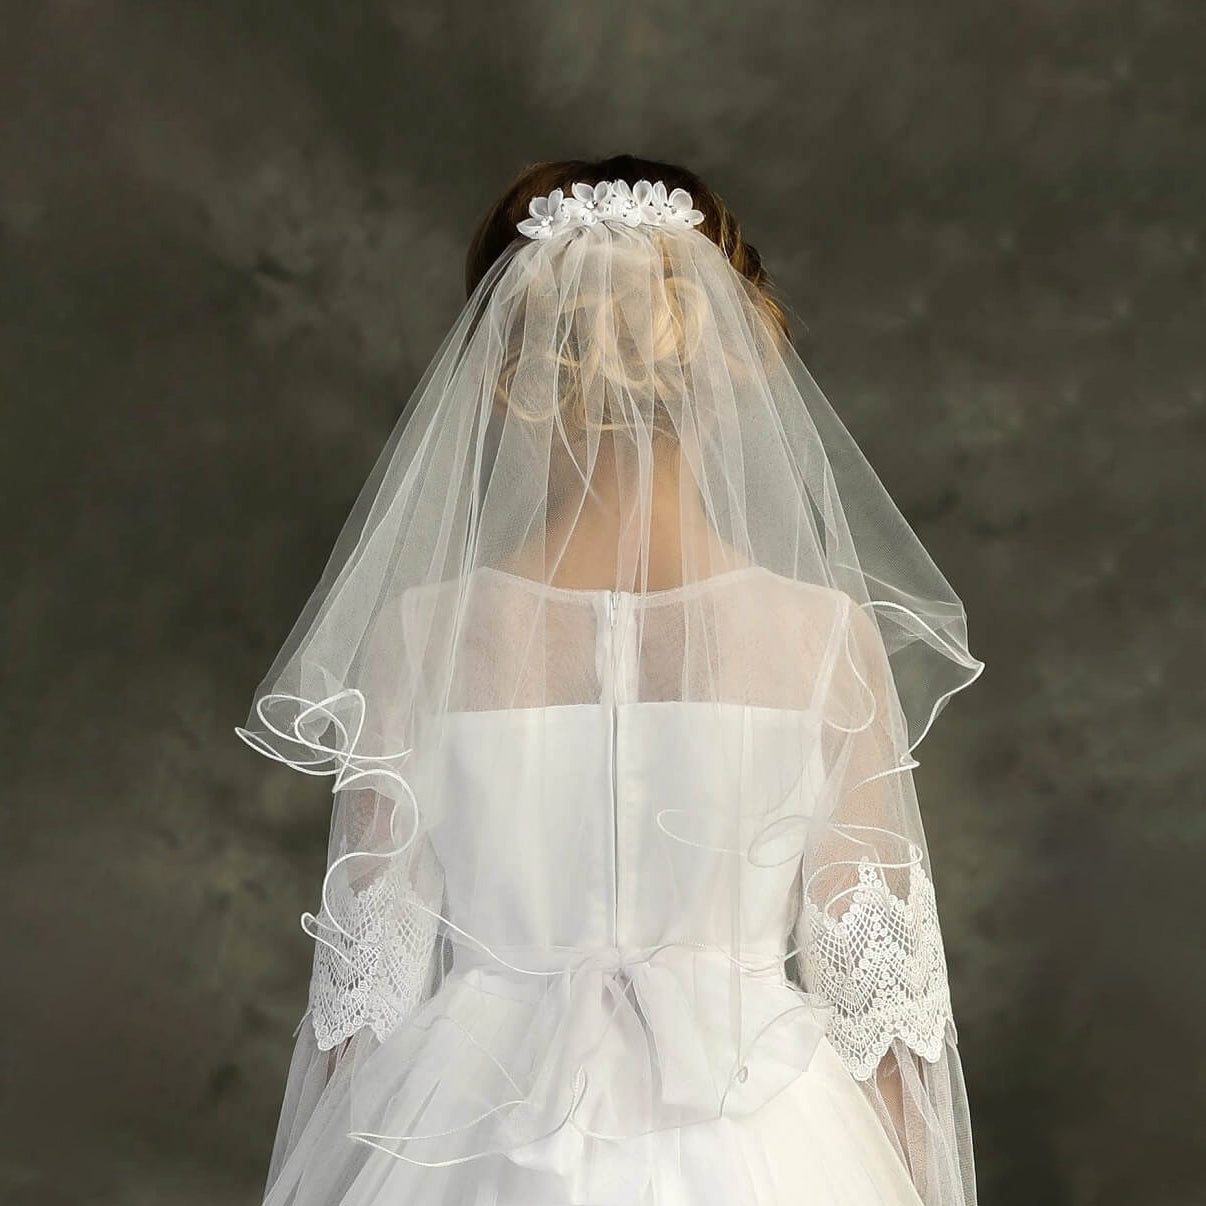 Girl's wearing white dress and flower comb with veil a